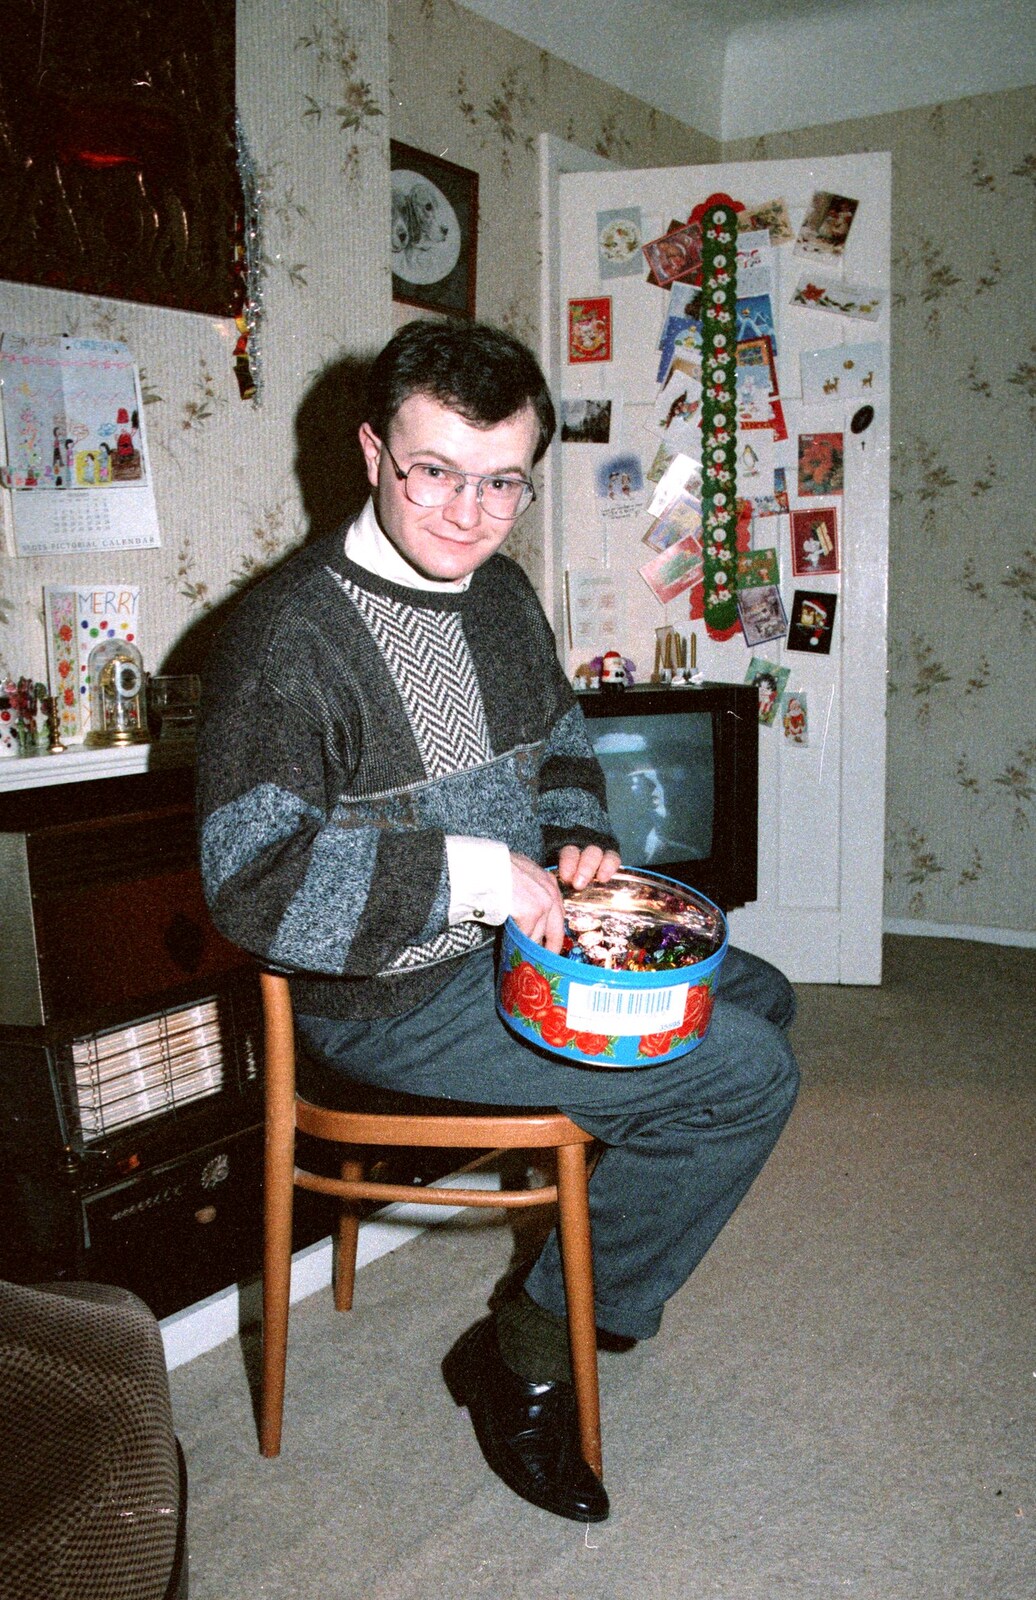 Hamish and a box of Quality Street from New Year's Eve at Hamish's, New Milton, Hampshire - 31st December 1988